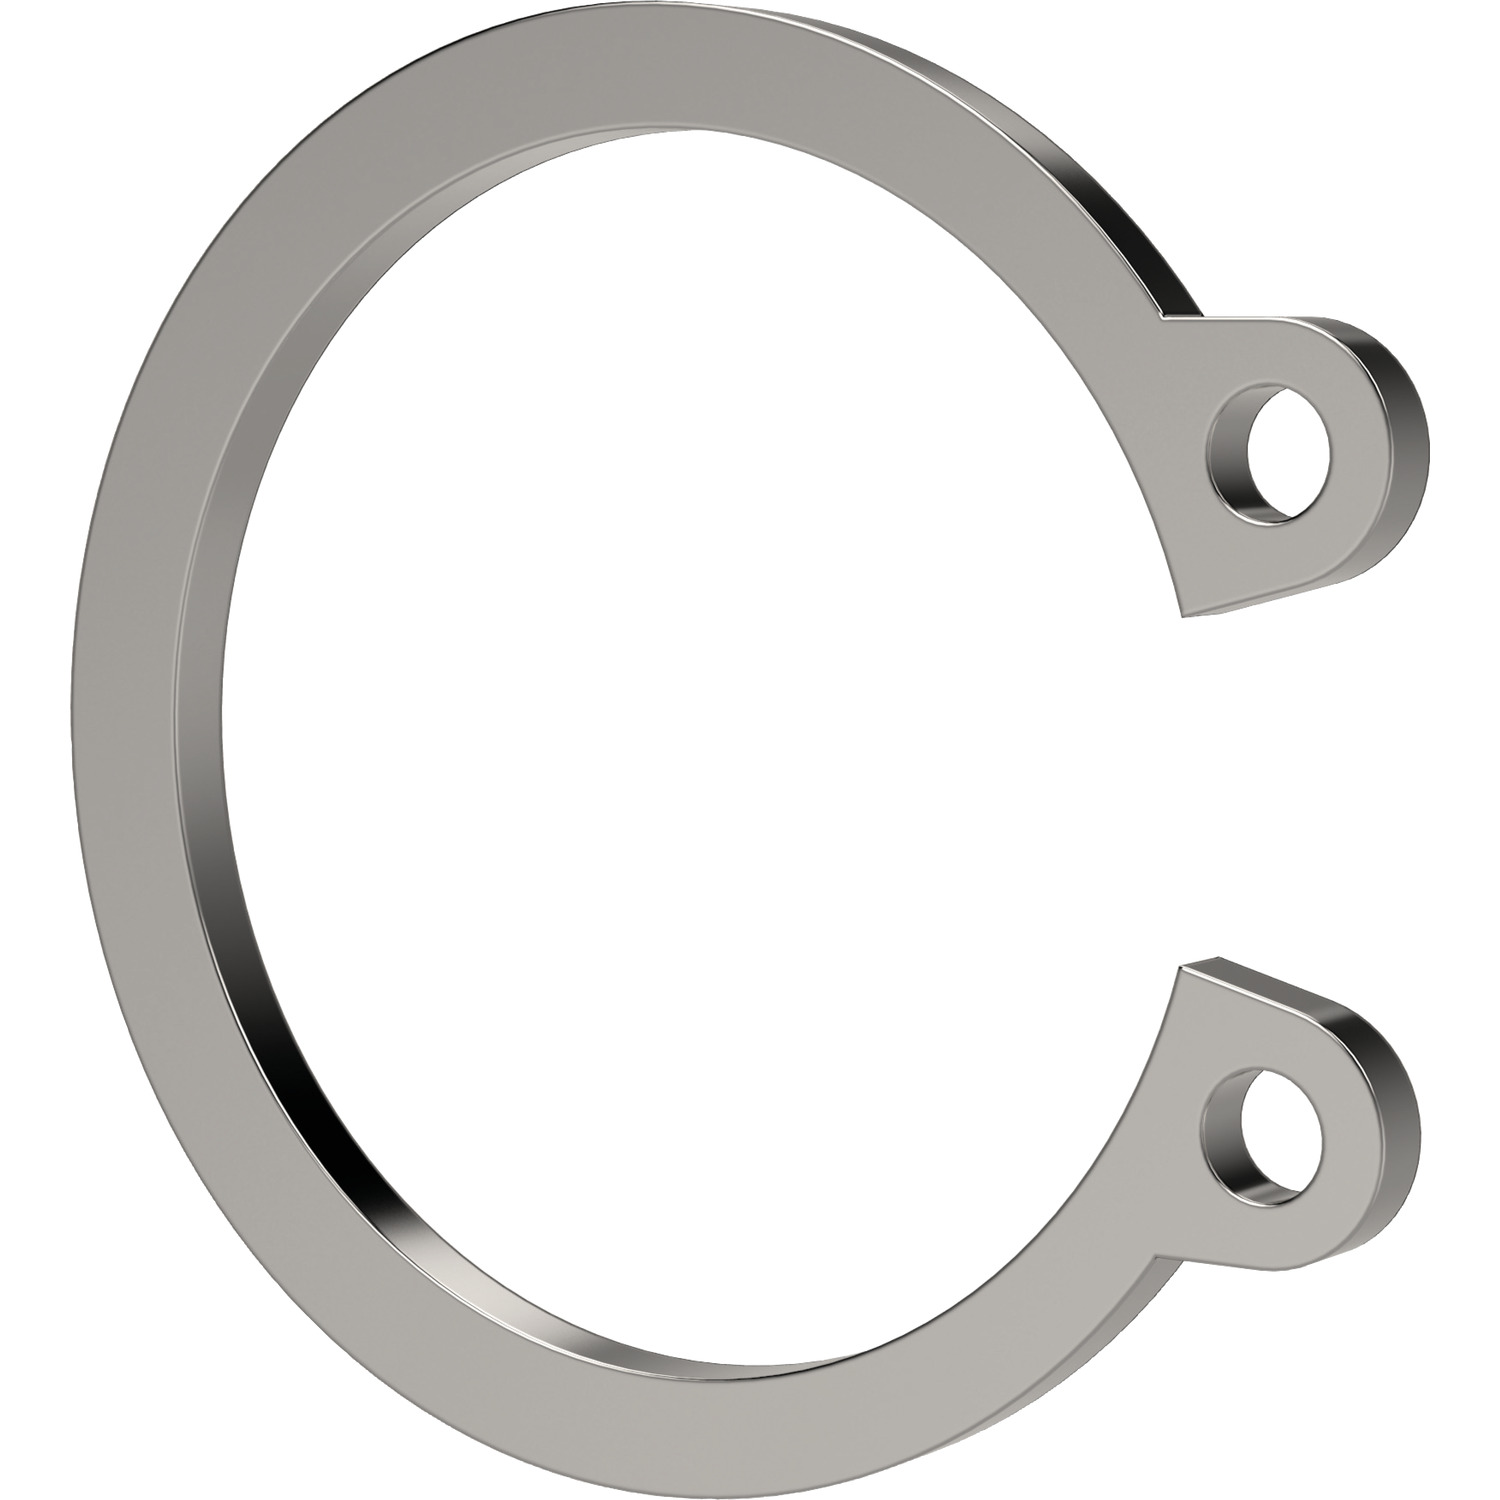 Clevis Circlips Clevis circlips are made from stainless steel (AISI 303). These circlips are machine to DIN 471. They are designed to be used alongside clevis pins and in a clevis joint.